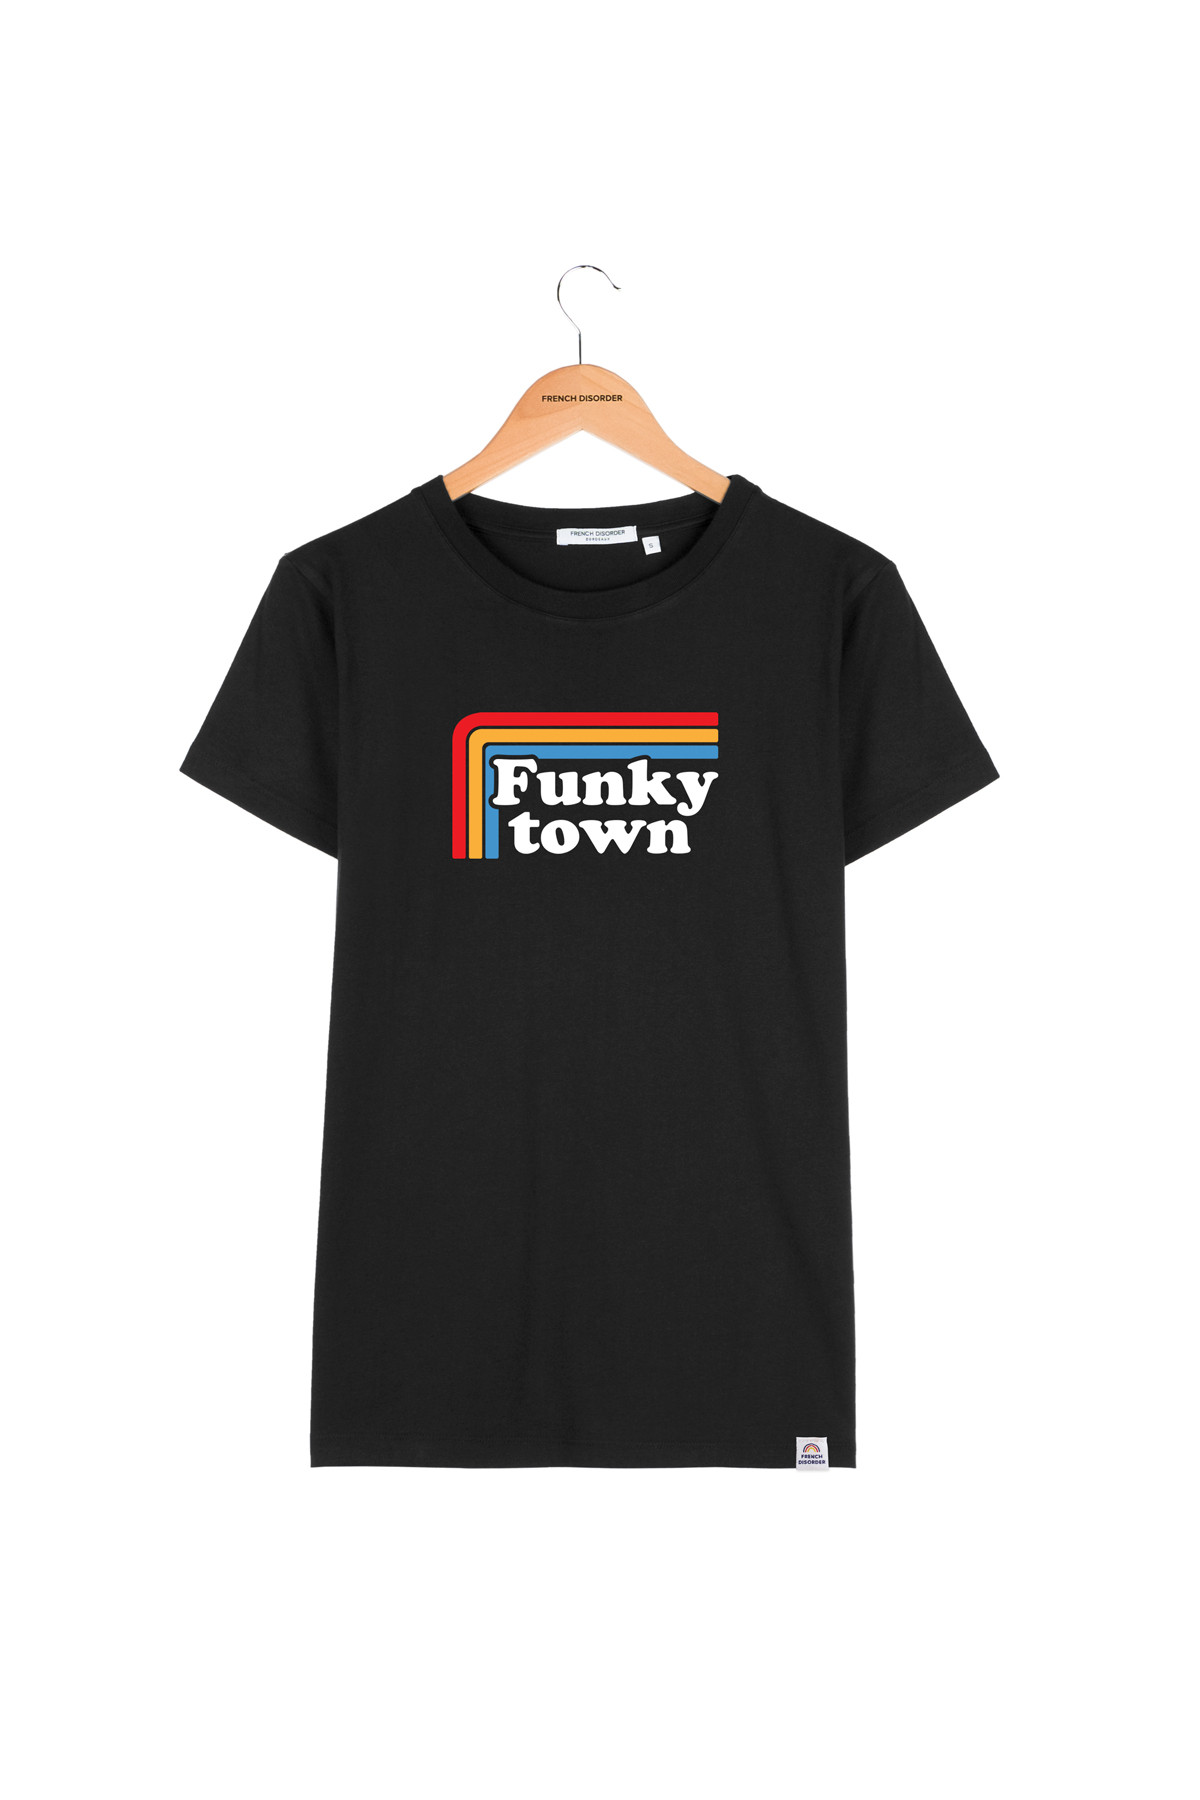 Tshirt FUNKY TOWN French Disorder